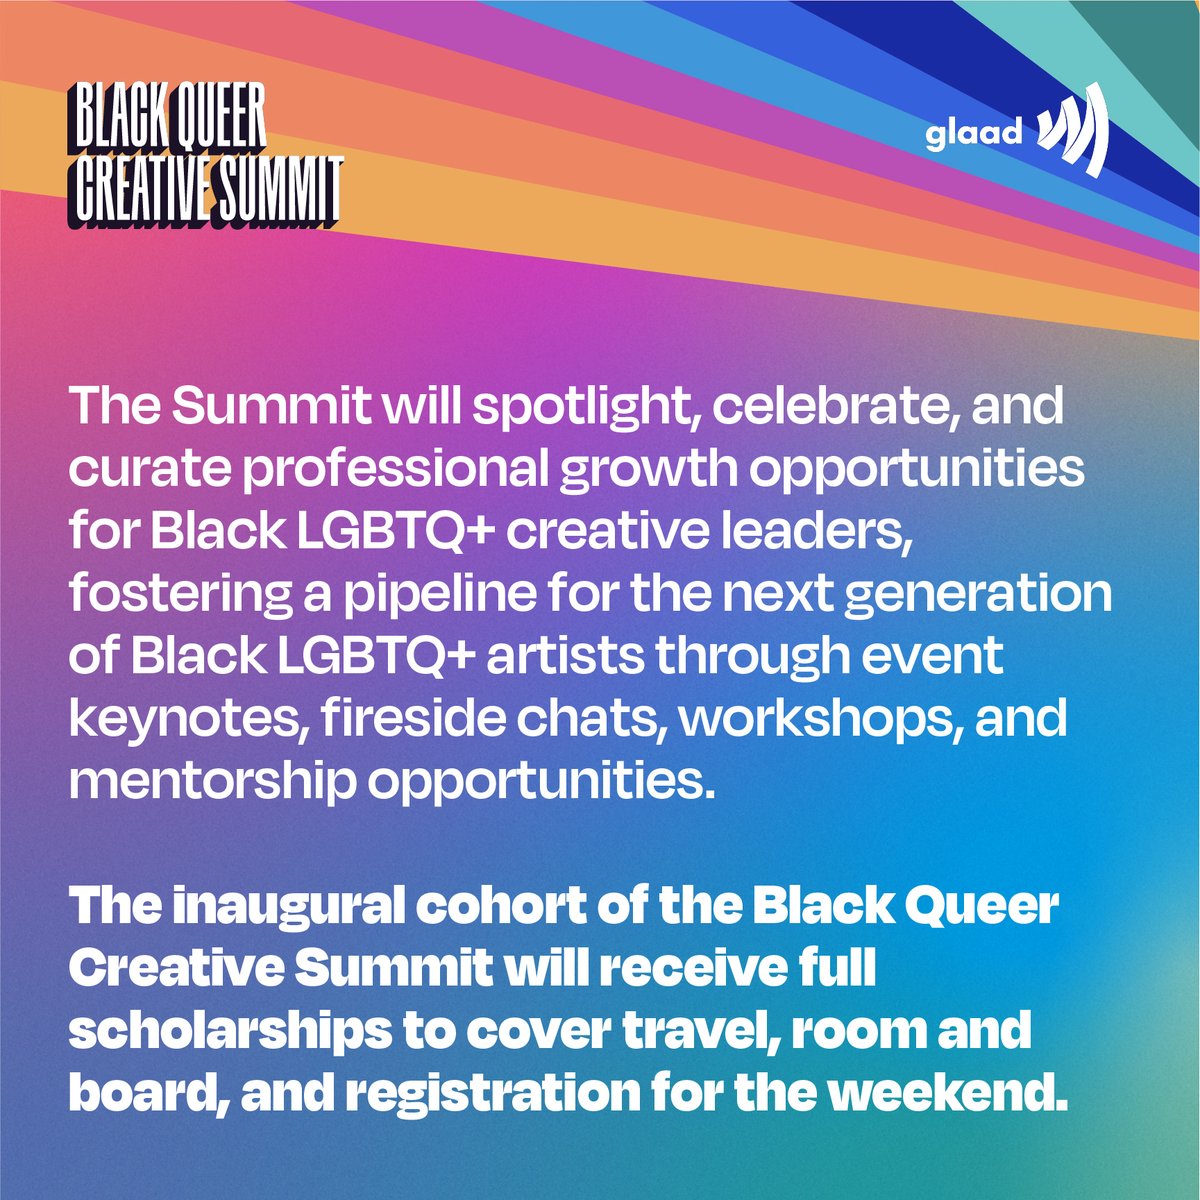 Exciting news! @glaad's inaugural Black Queer Creative Summit in LA, Sep 14-17. It focuses on equitable representation, industry conversations, and pathways for emerging Black LGBTQ+ creatives. Apply by June 12th, 11:59 PT at glaad.org/bqcs.